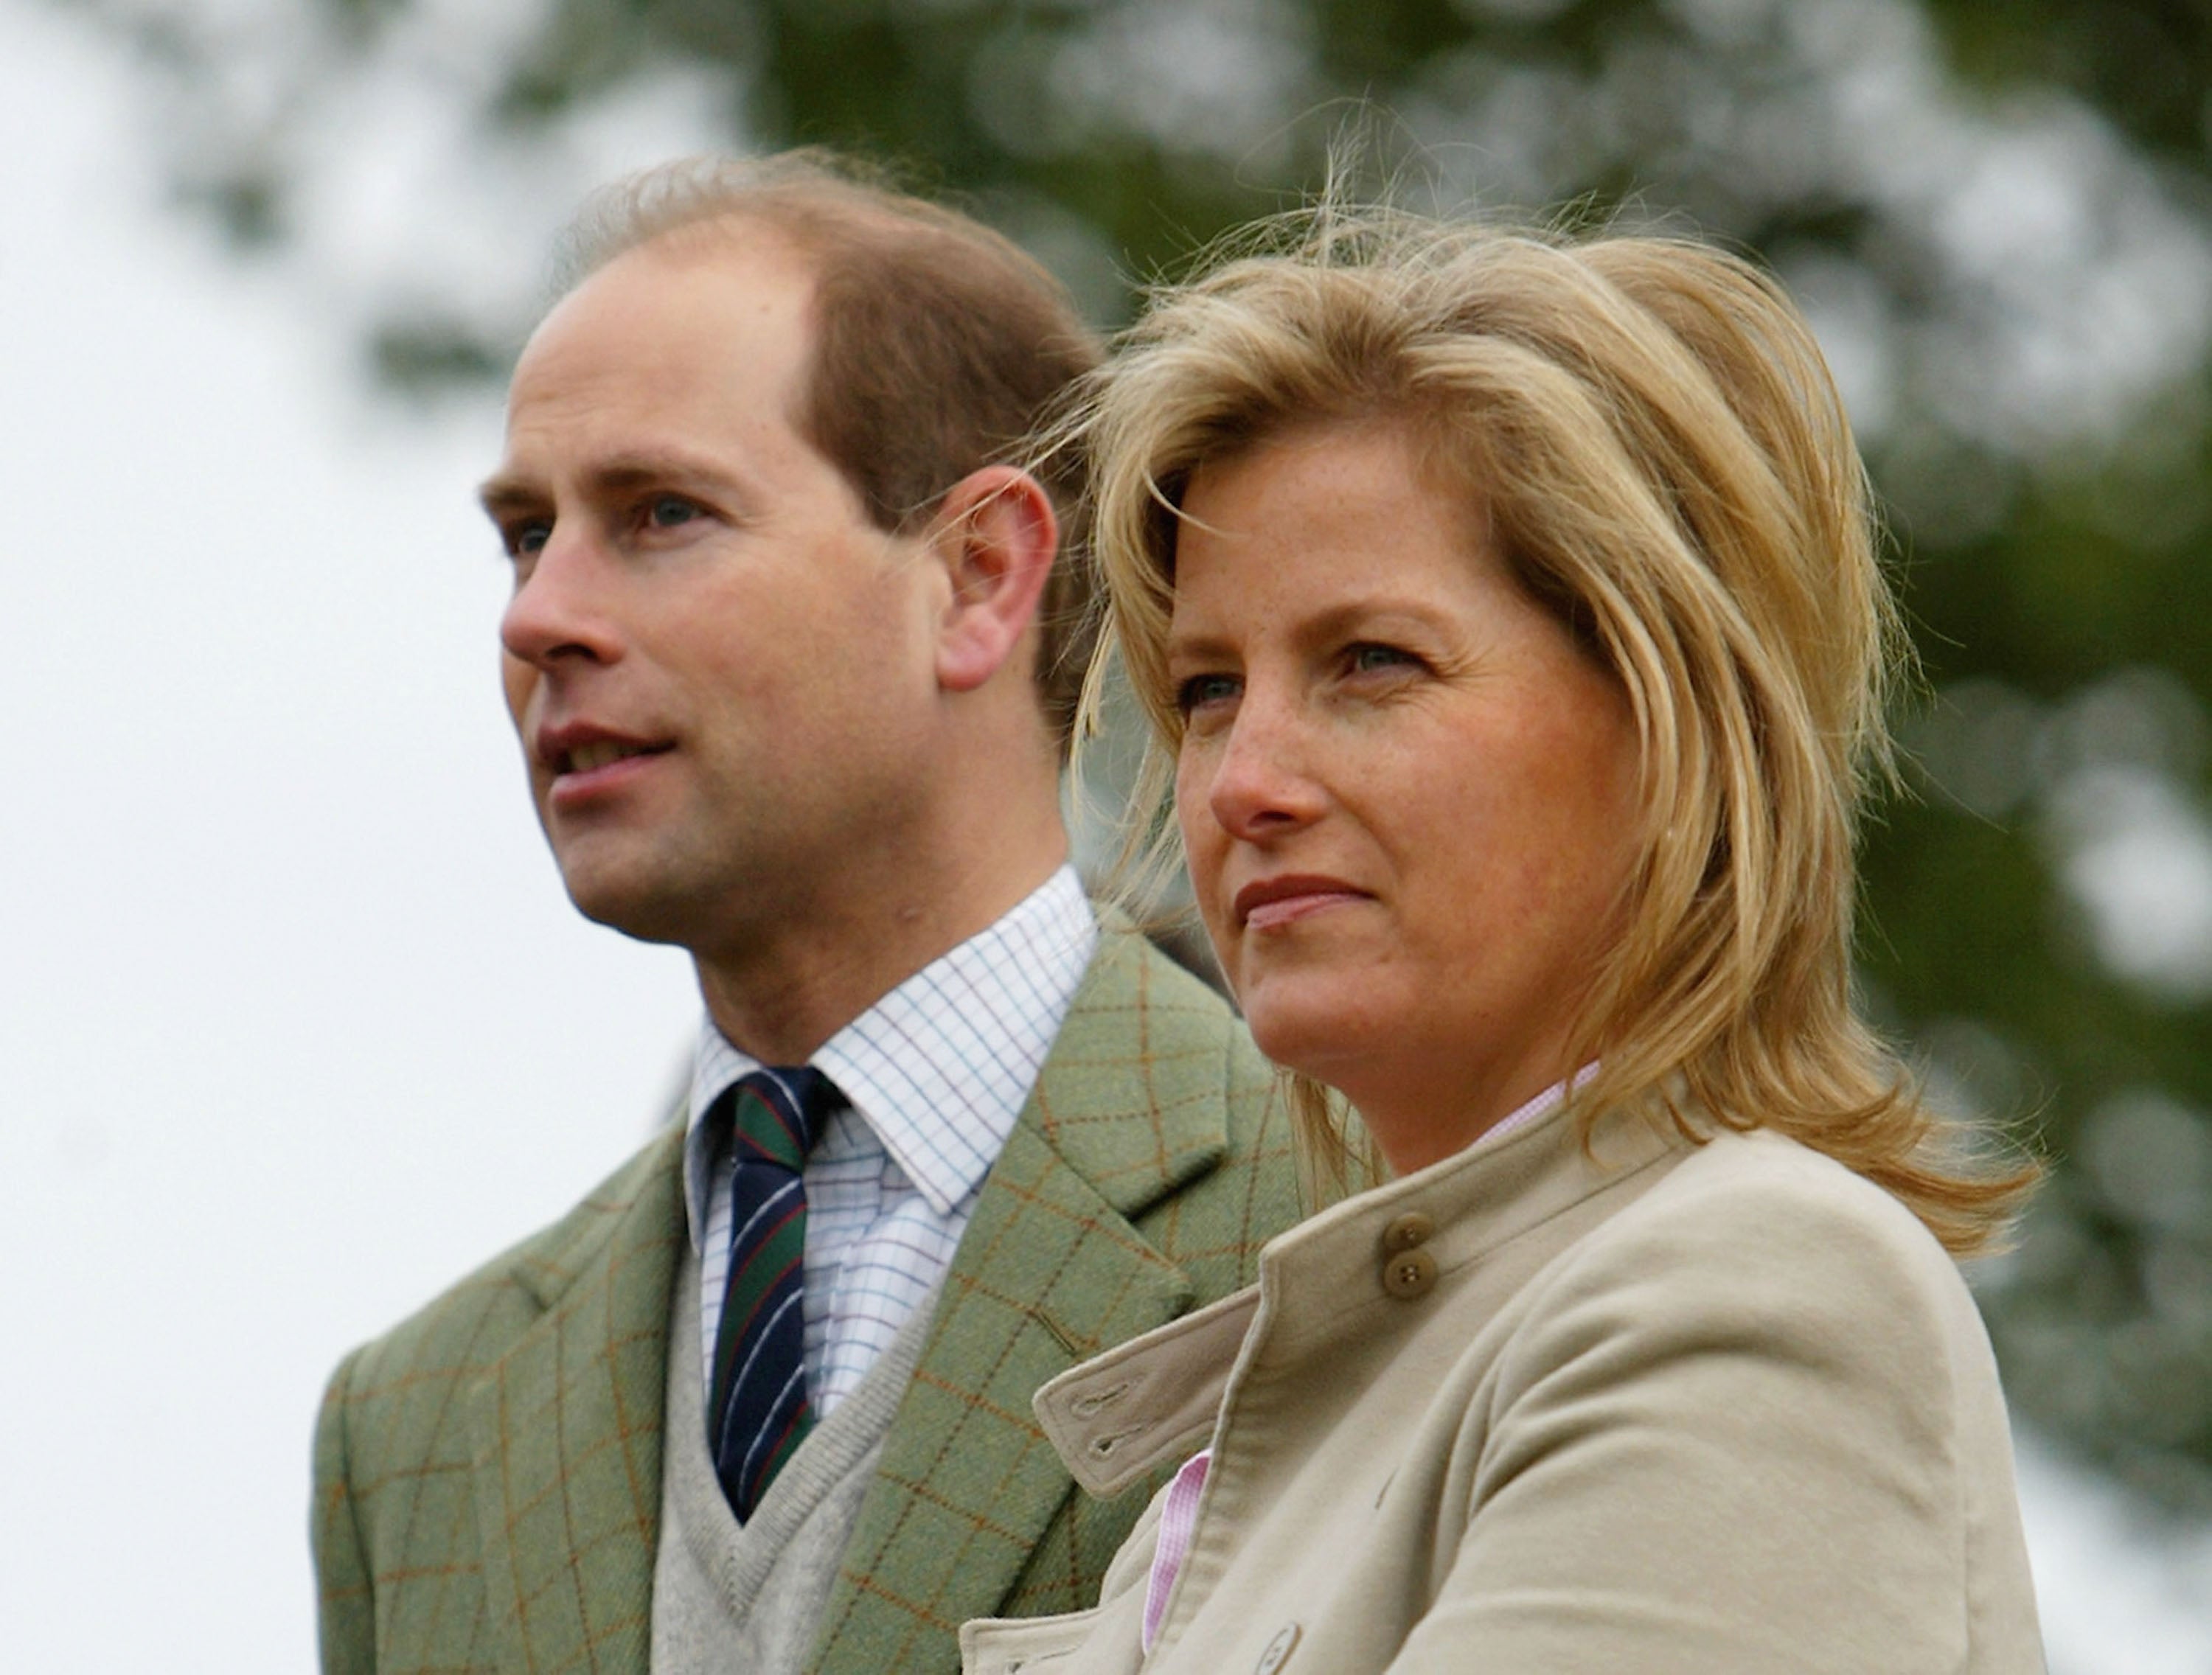 Prince Edward and the Countess of Wessex were due to visit the island as part of the Queen’s platinum jubilee celebrations